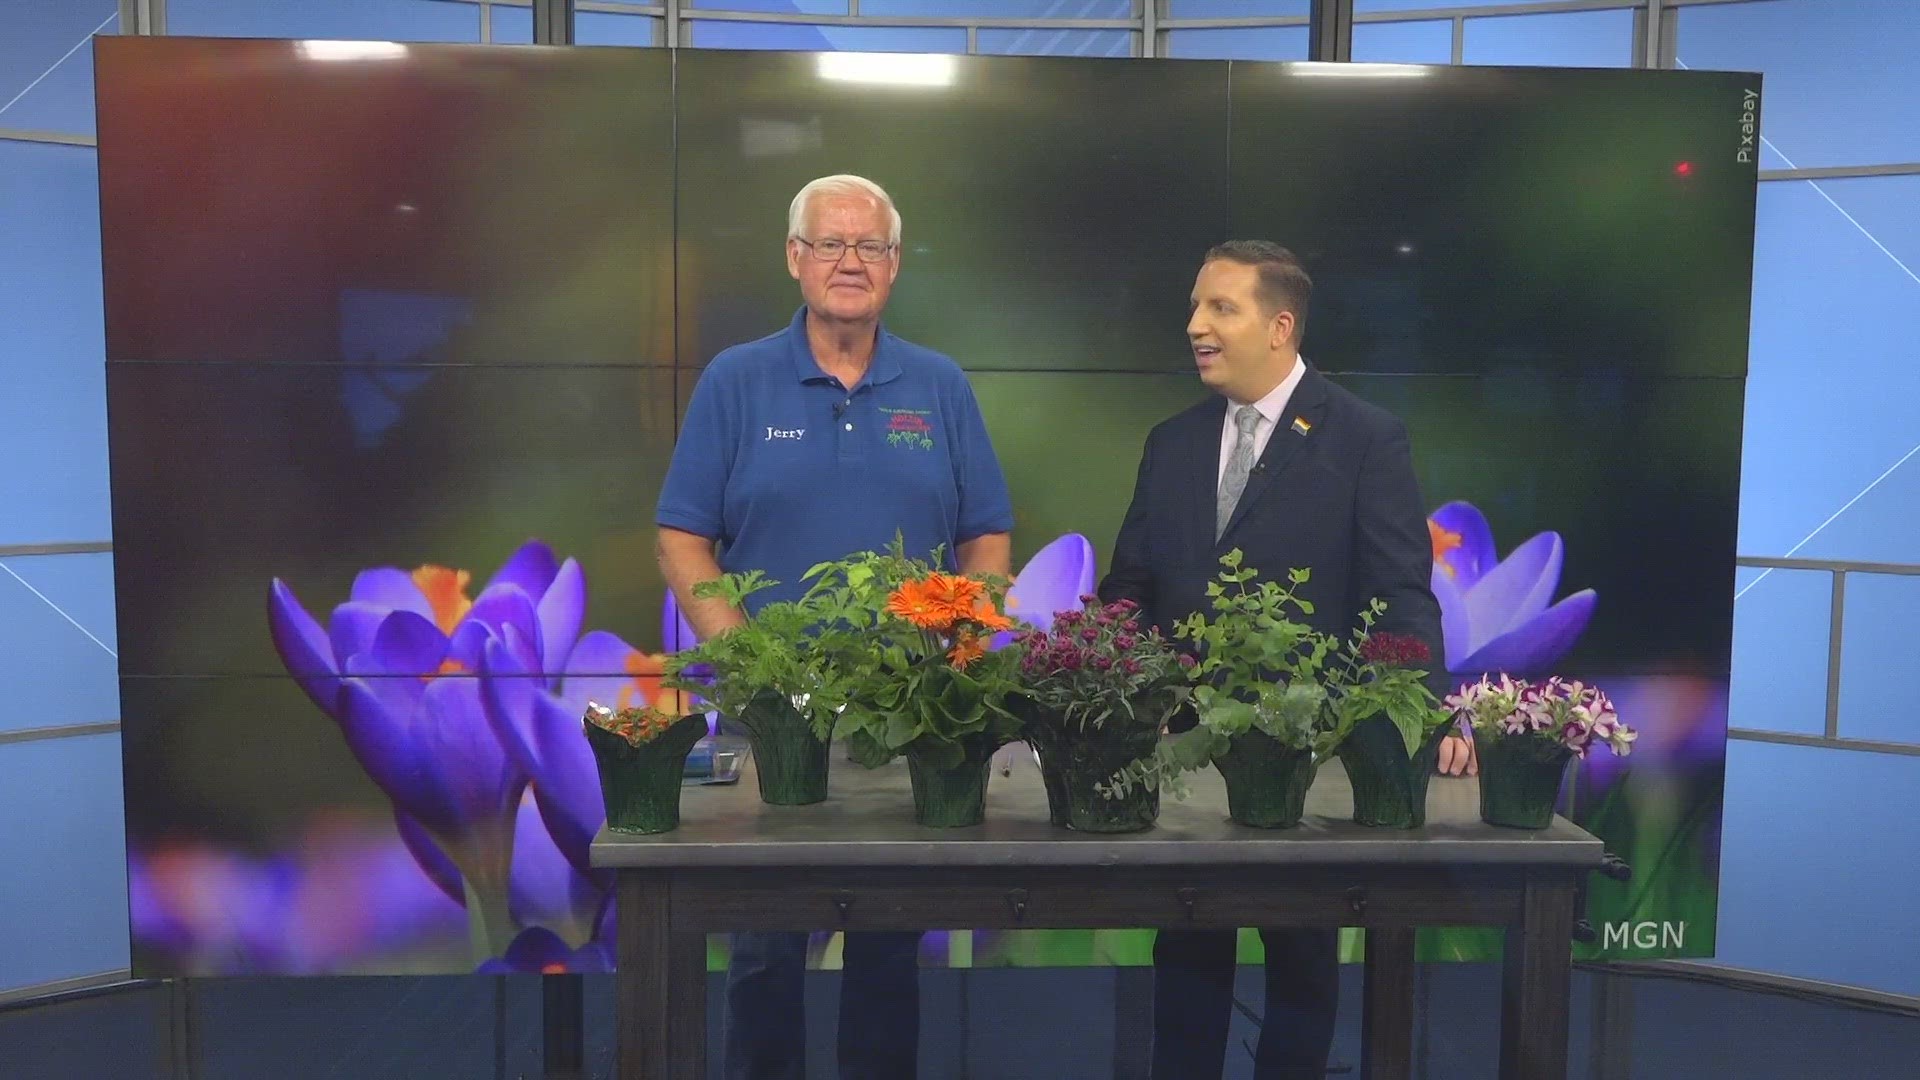 Jerry Holub with Holub Greenhouses brought some summer plants and fast tips for gardeners.